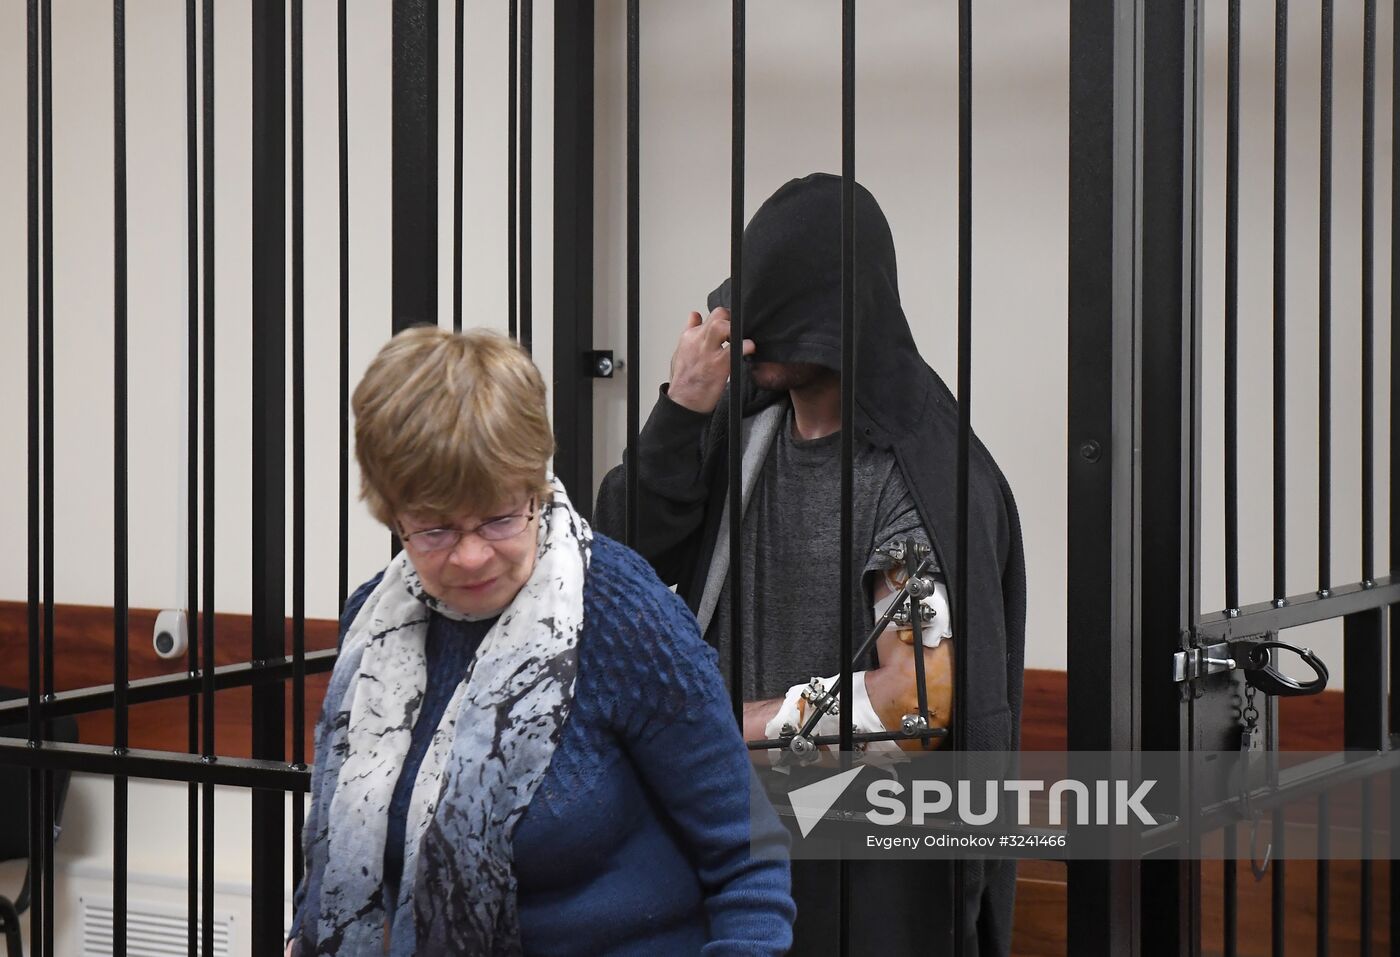 Court hears investigators' motion on arrest of suspects in Moscow City shooting case